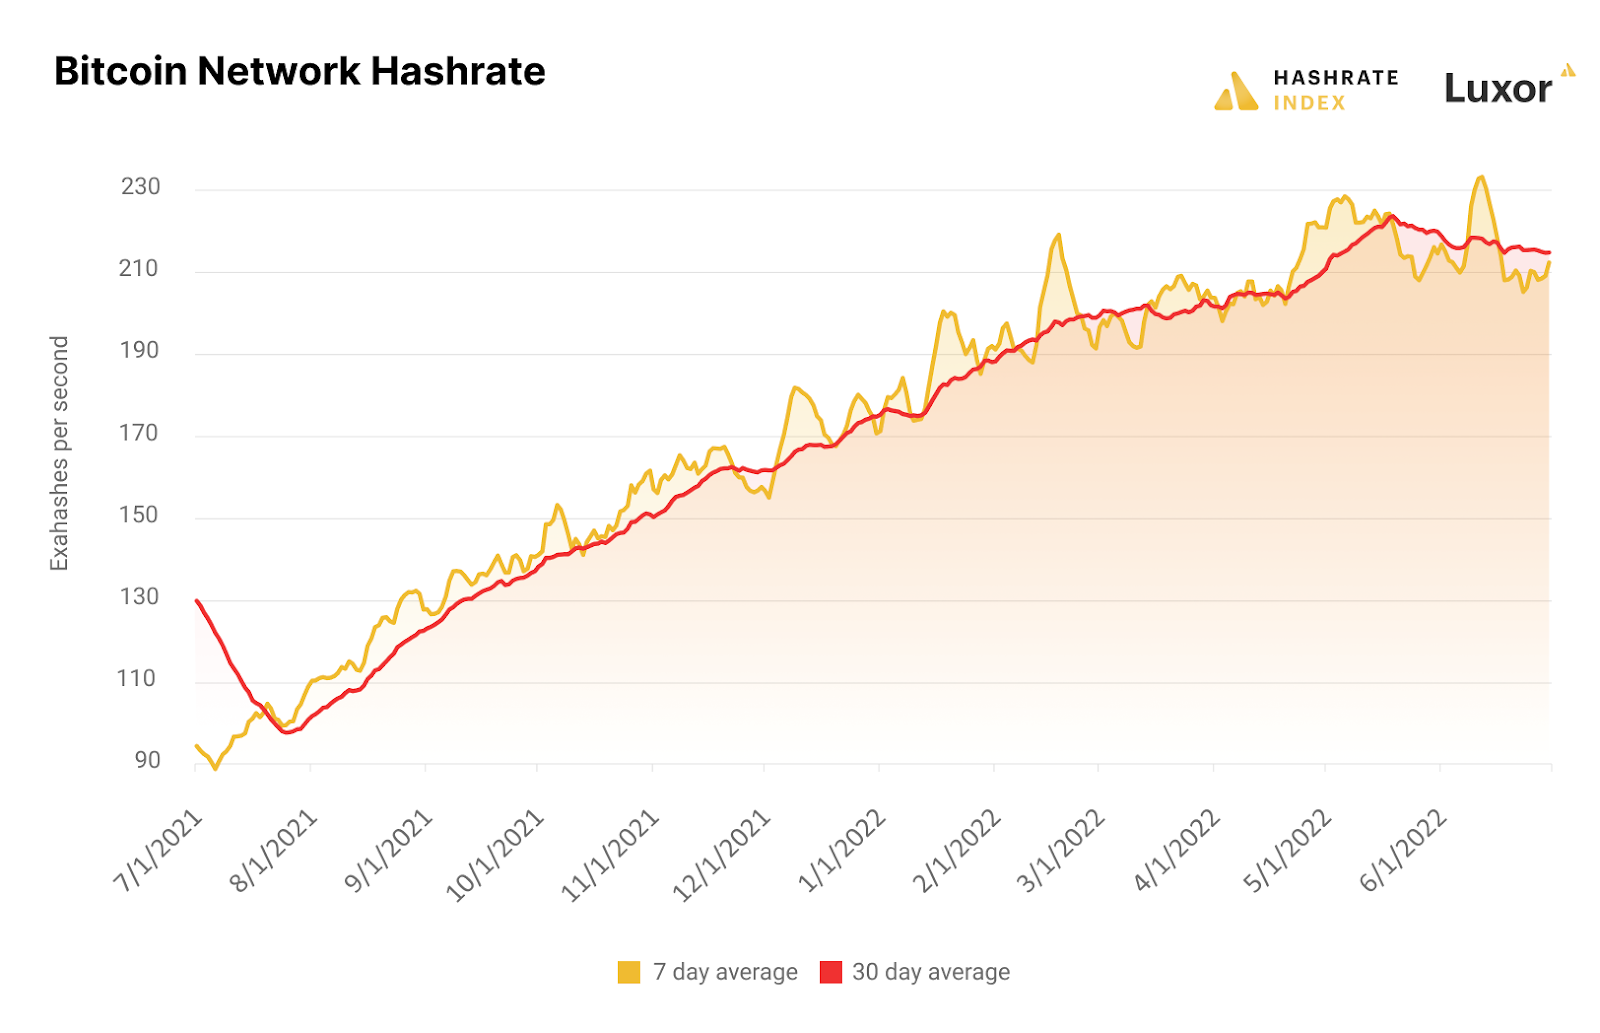 Bitcoin 7-day and 30-day average hashrate 2021-2022